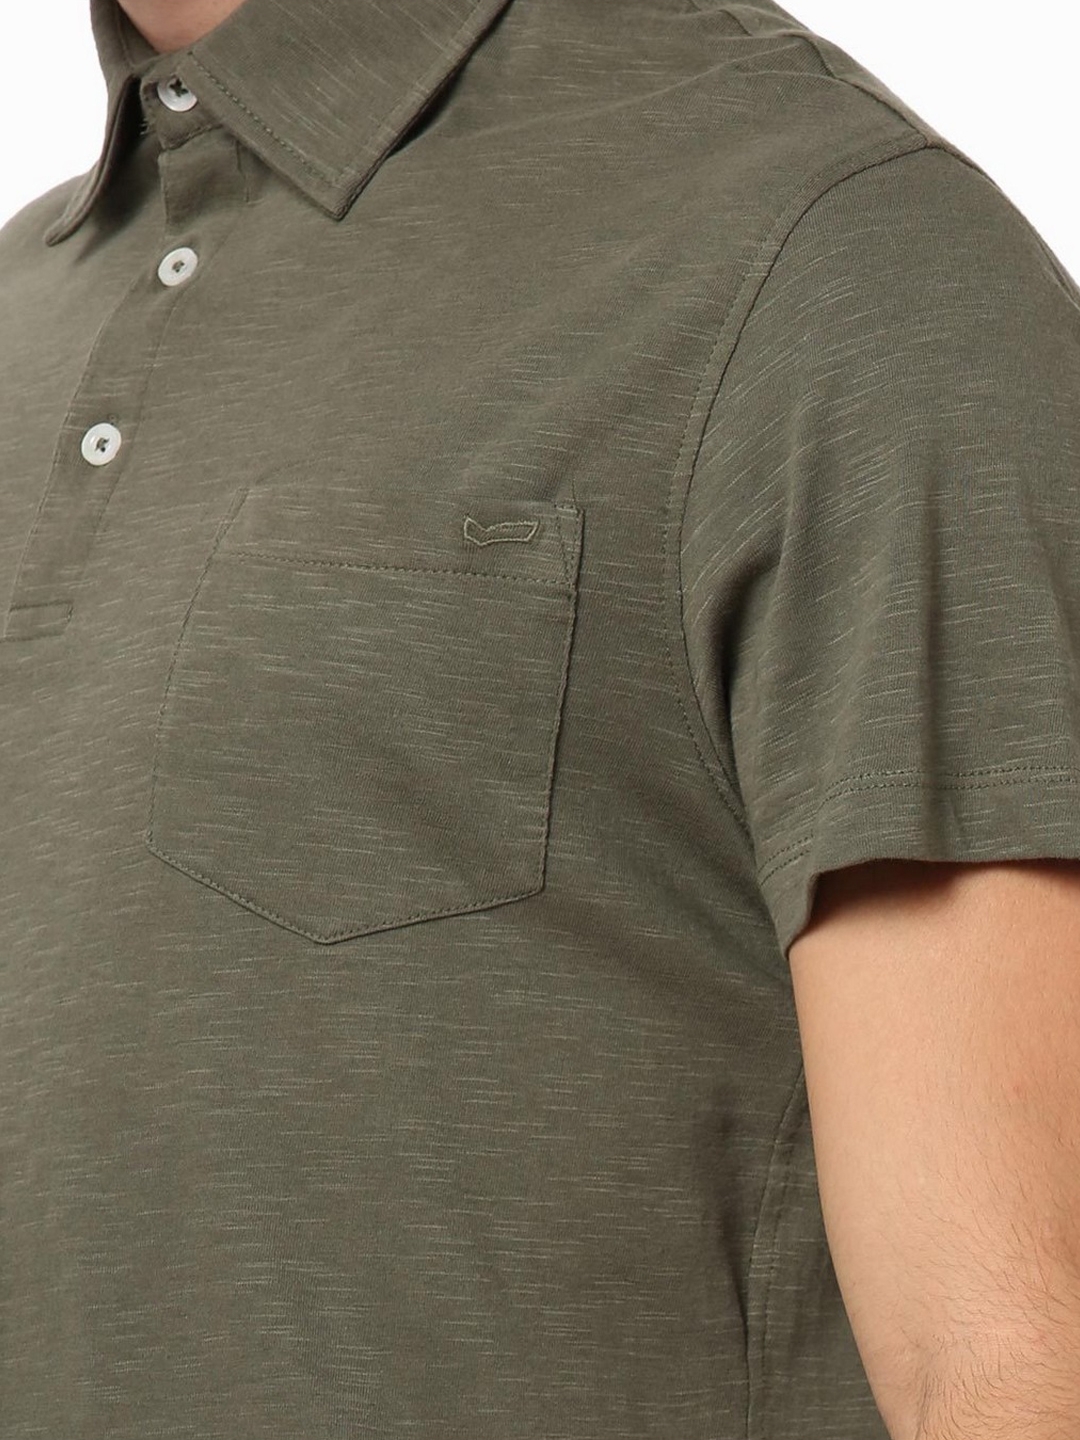 Manny Heathered Slim Fit Polo T-shirt